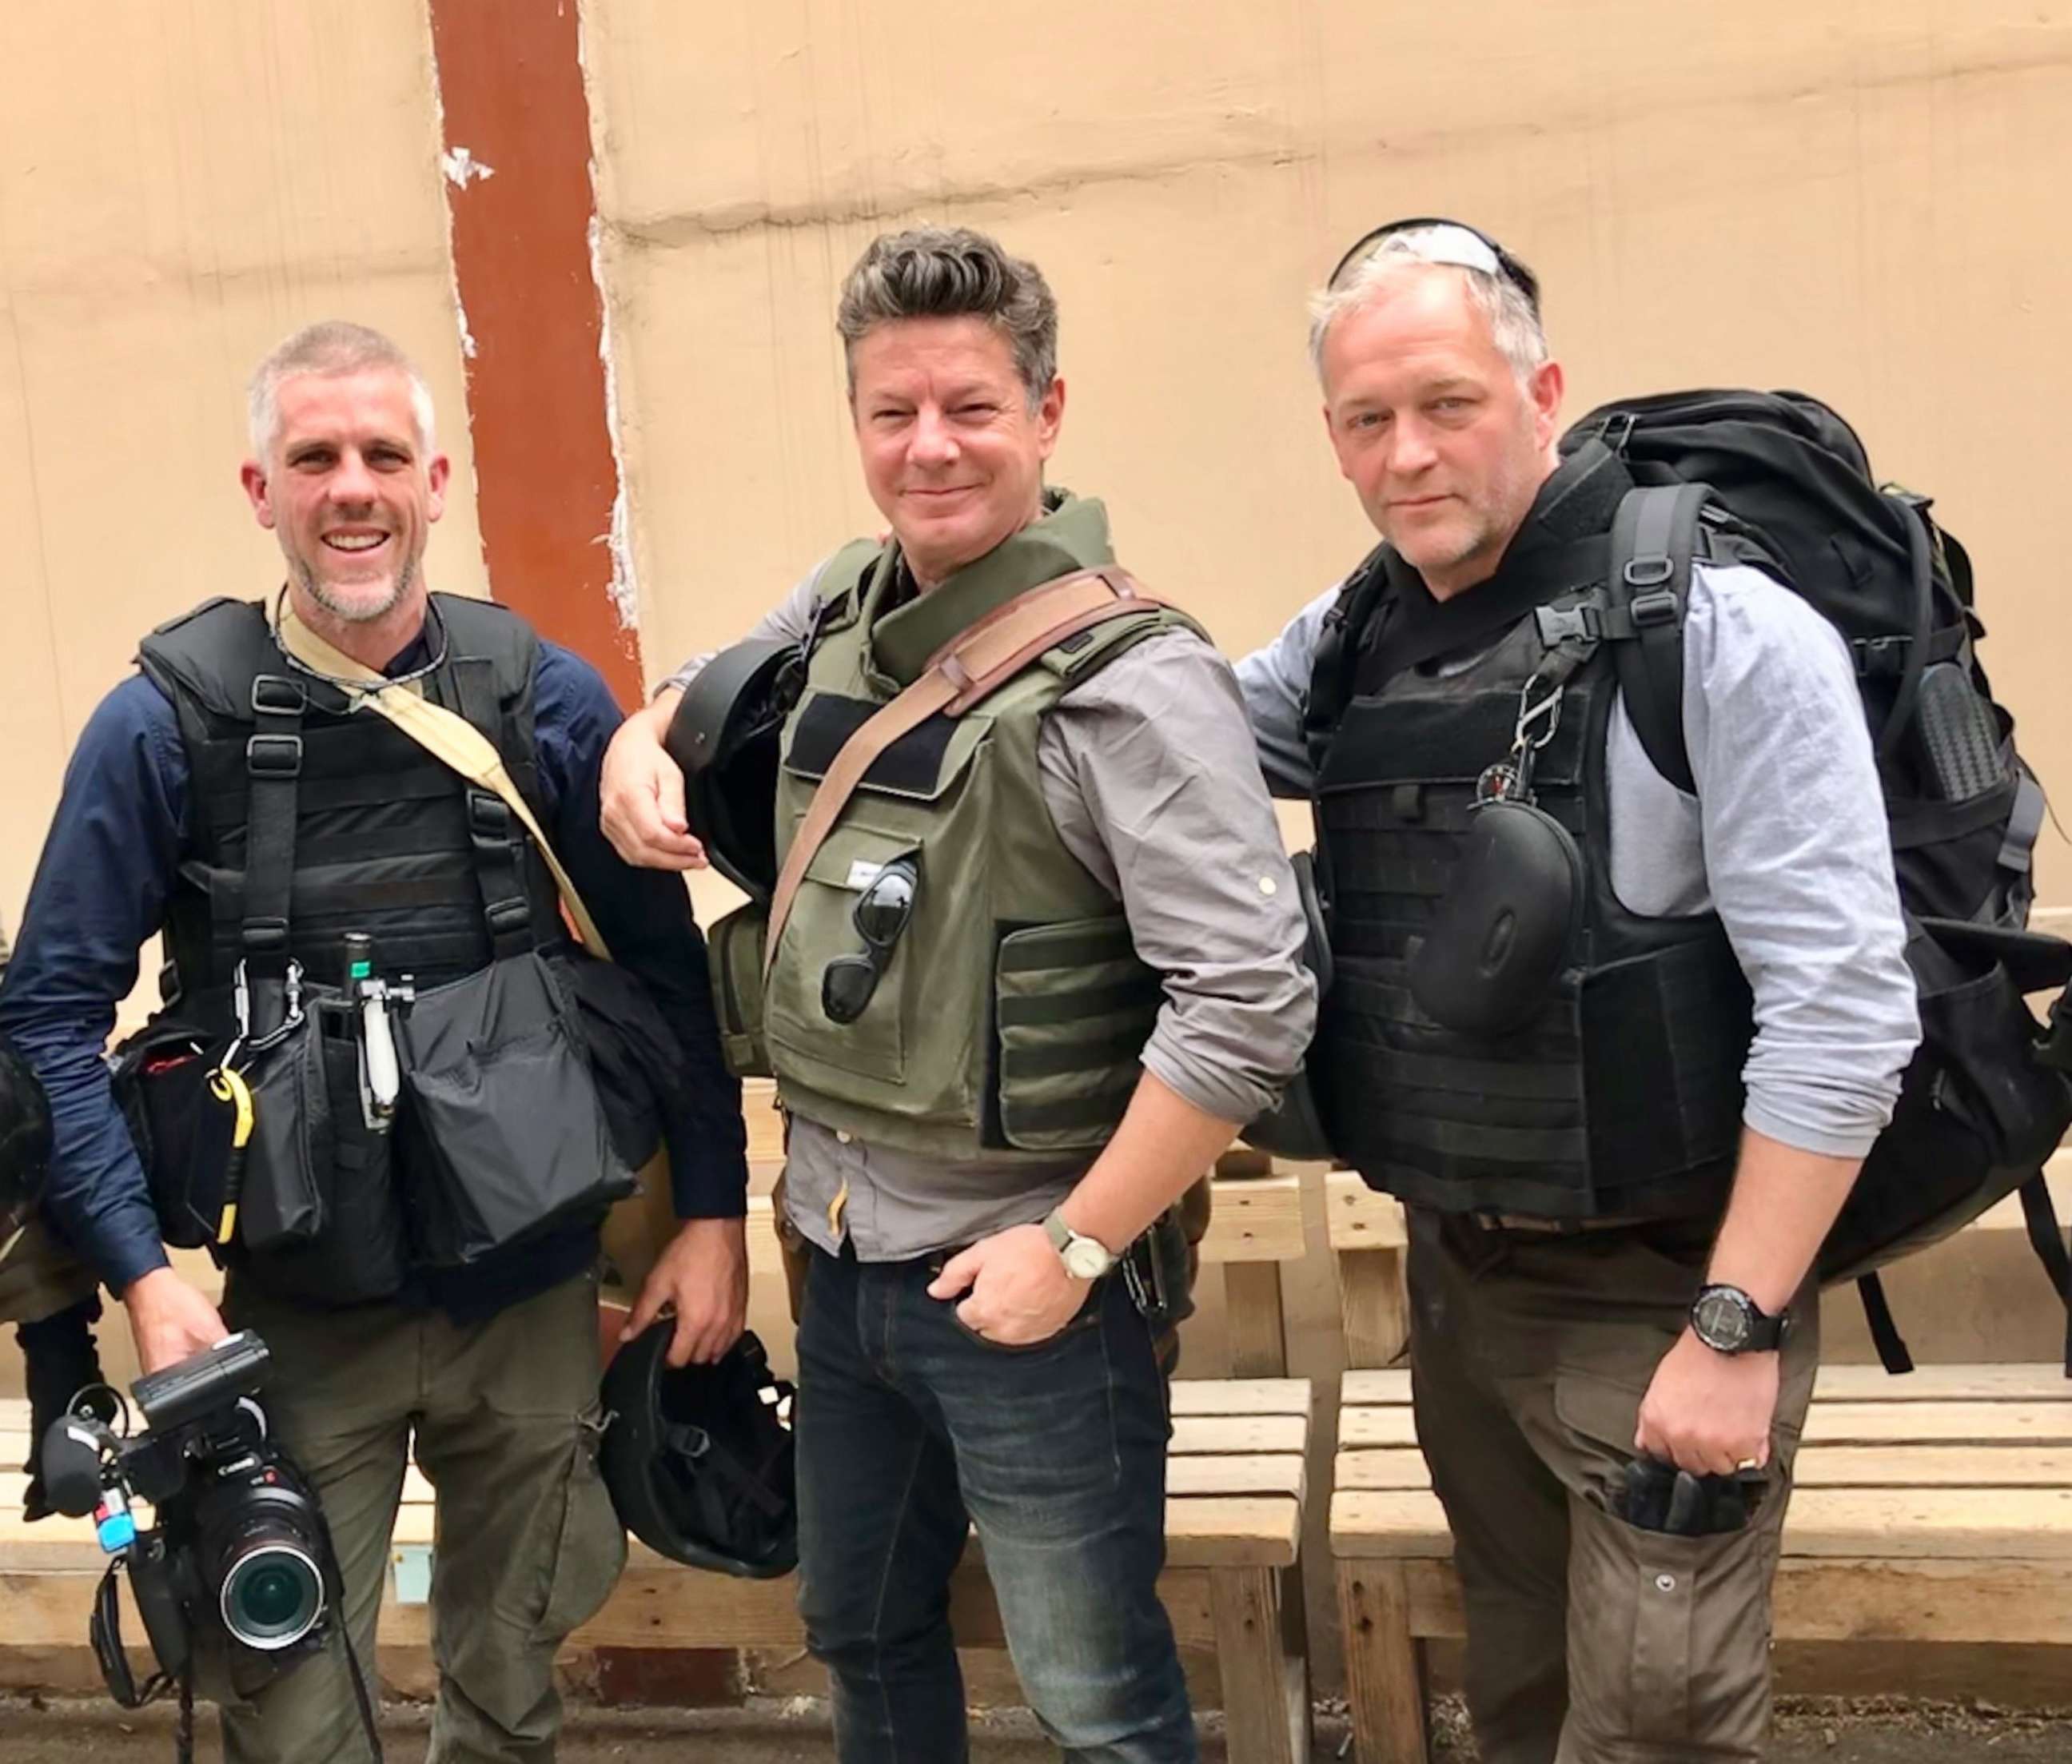 PHOTO: ABC News photographer James Gillings, ABC News Senior Foreign Correspondent Ian Pannell, and ABC News producer Bruno Roeber on a reporting trip in Afghanistan in June 2018.